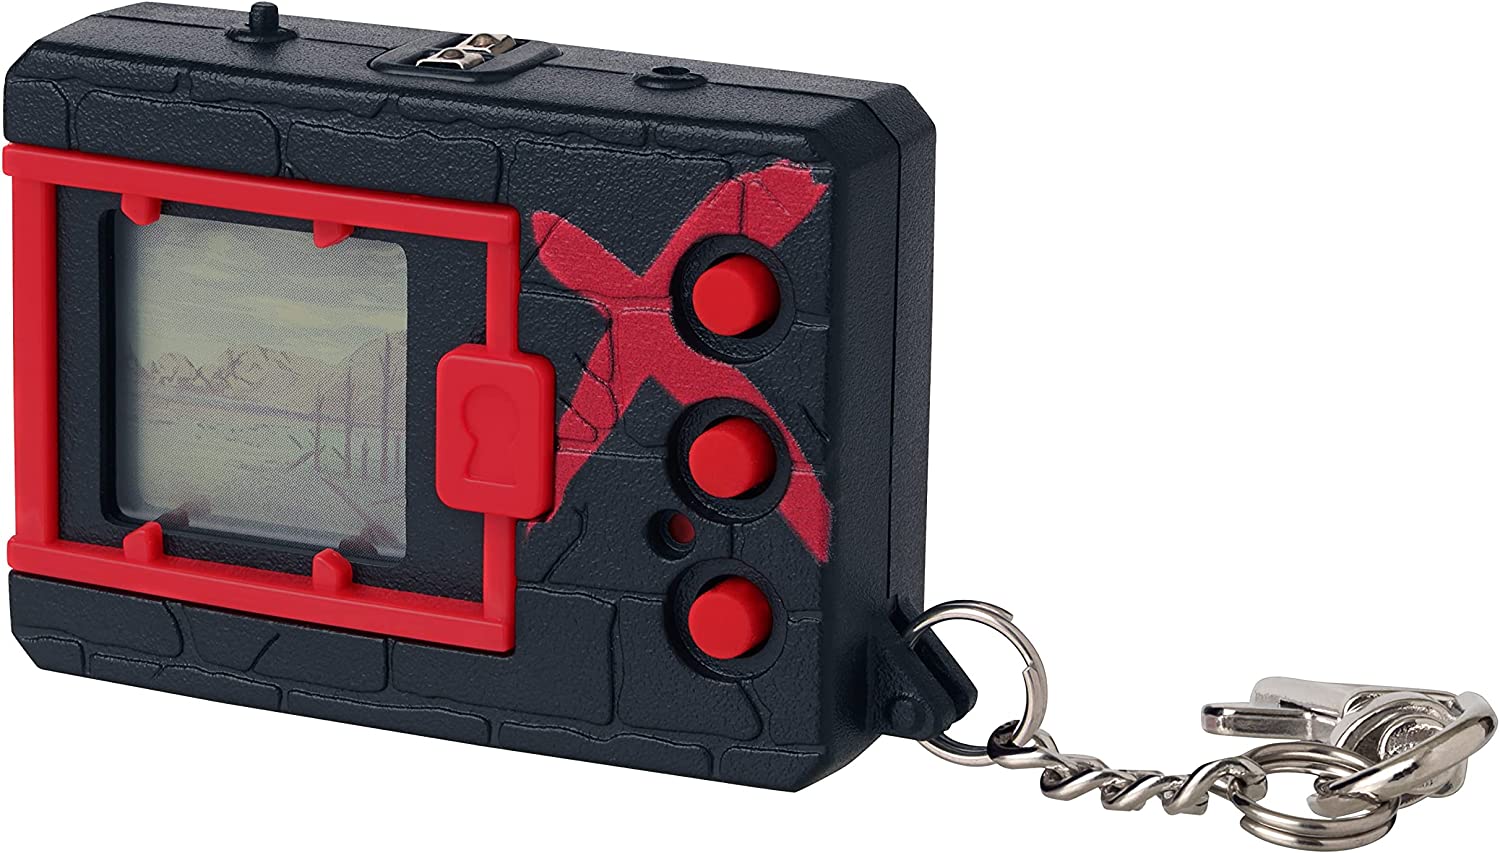 Digimon X (Black & Red) image count 2